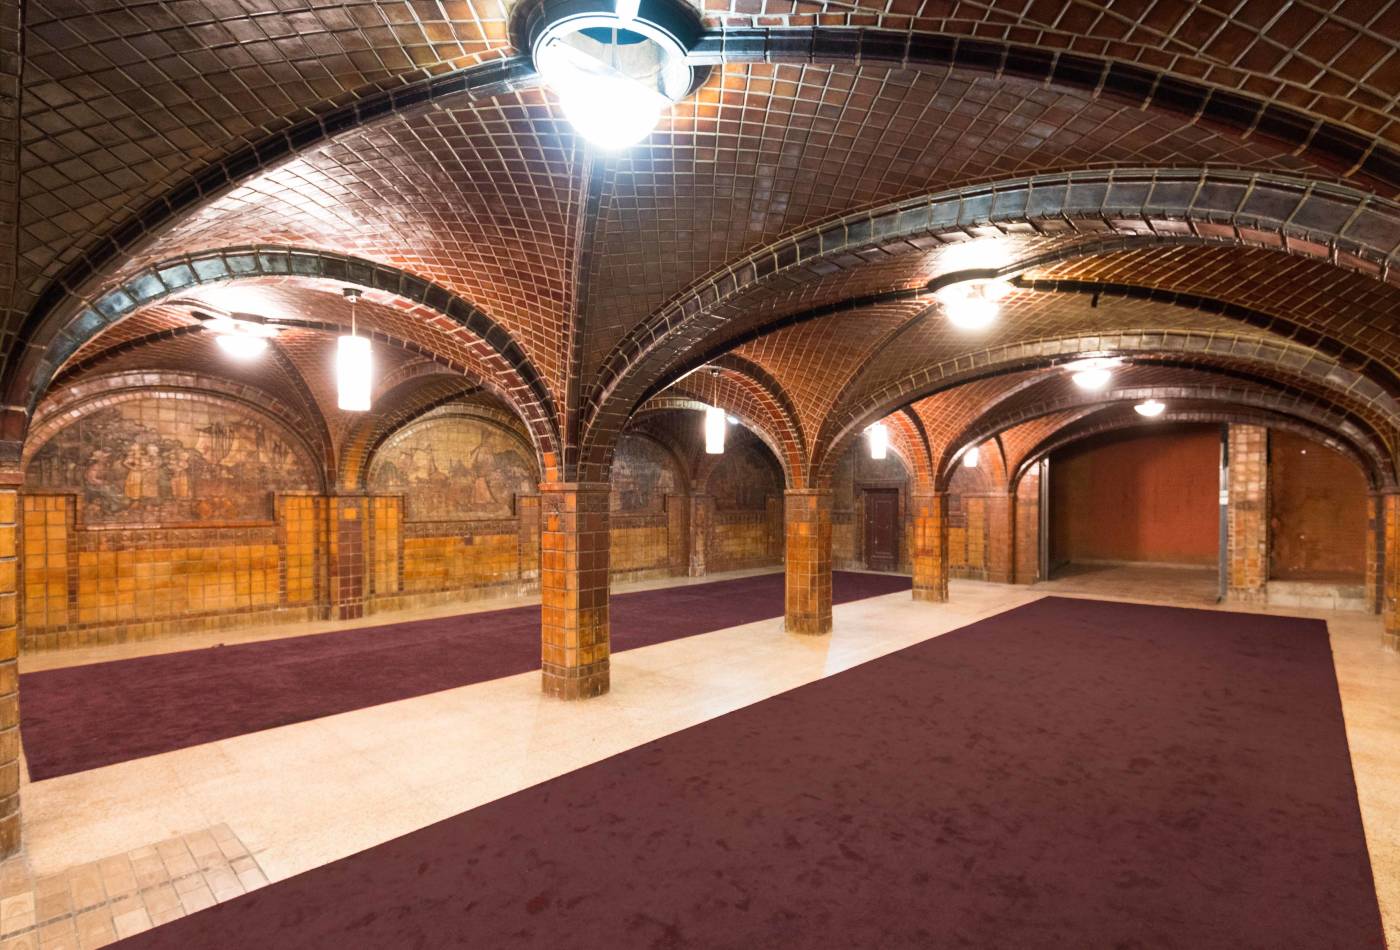 This remarkable interior space is located inside the Eshman Building, which was designed by Los Angeles architecture firm Morgan and Walls and originally constructed in 1898. 

